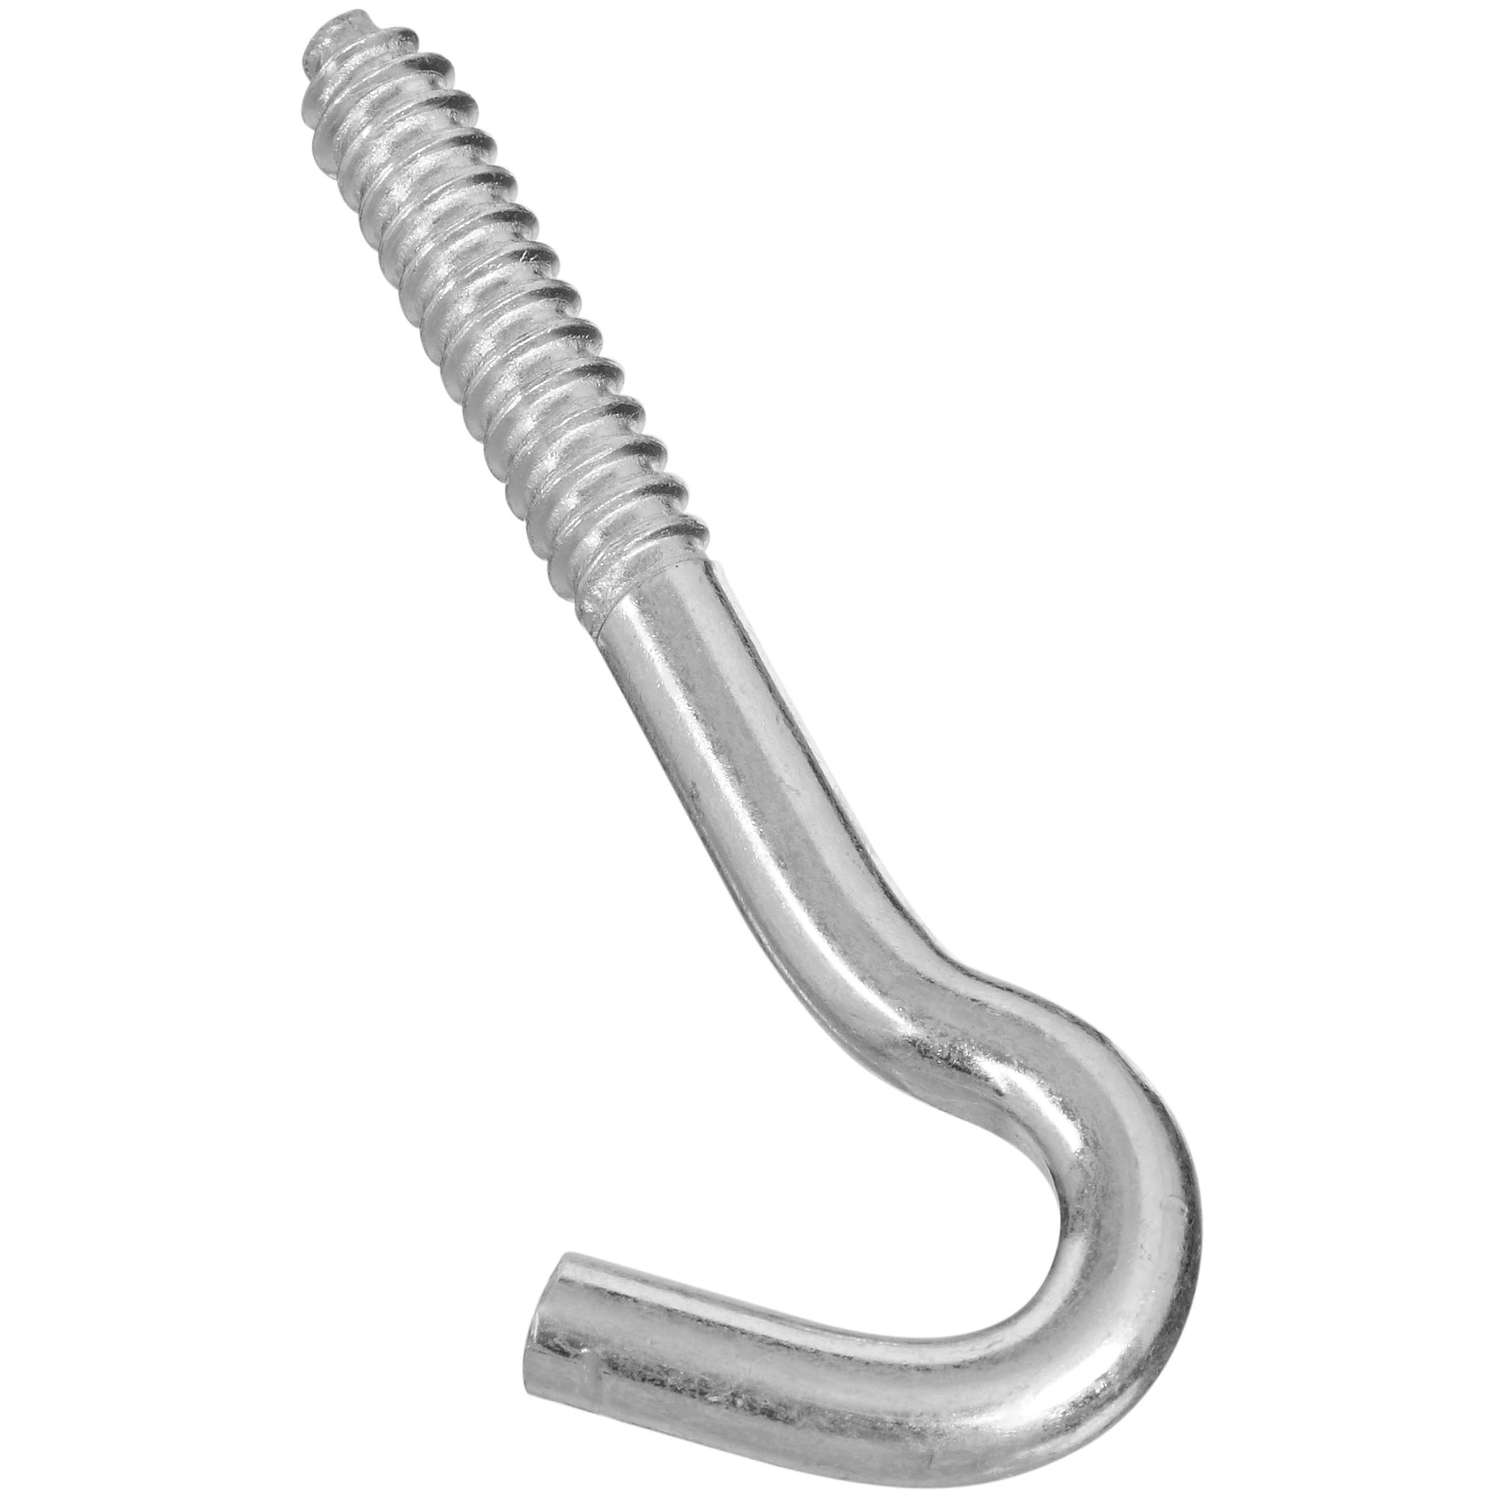 Stanley National Hardware 2153BC 1/4" x 4-1/4" Screw Hook in Stainless Steel 